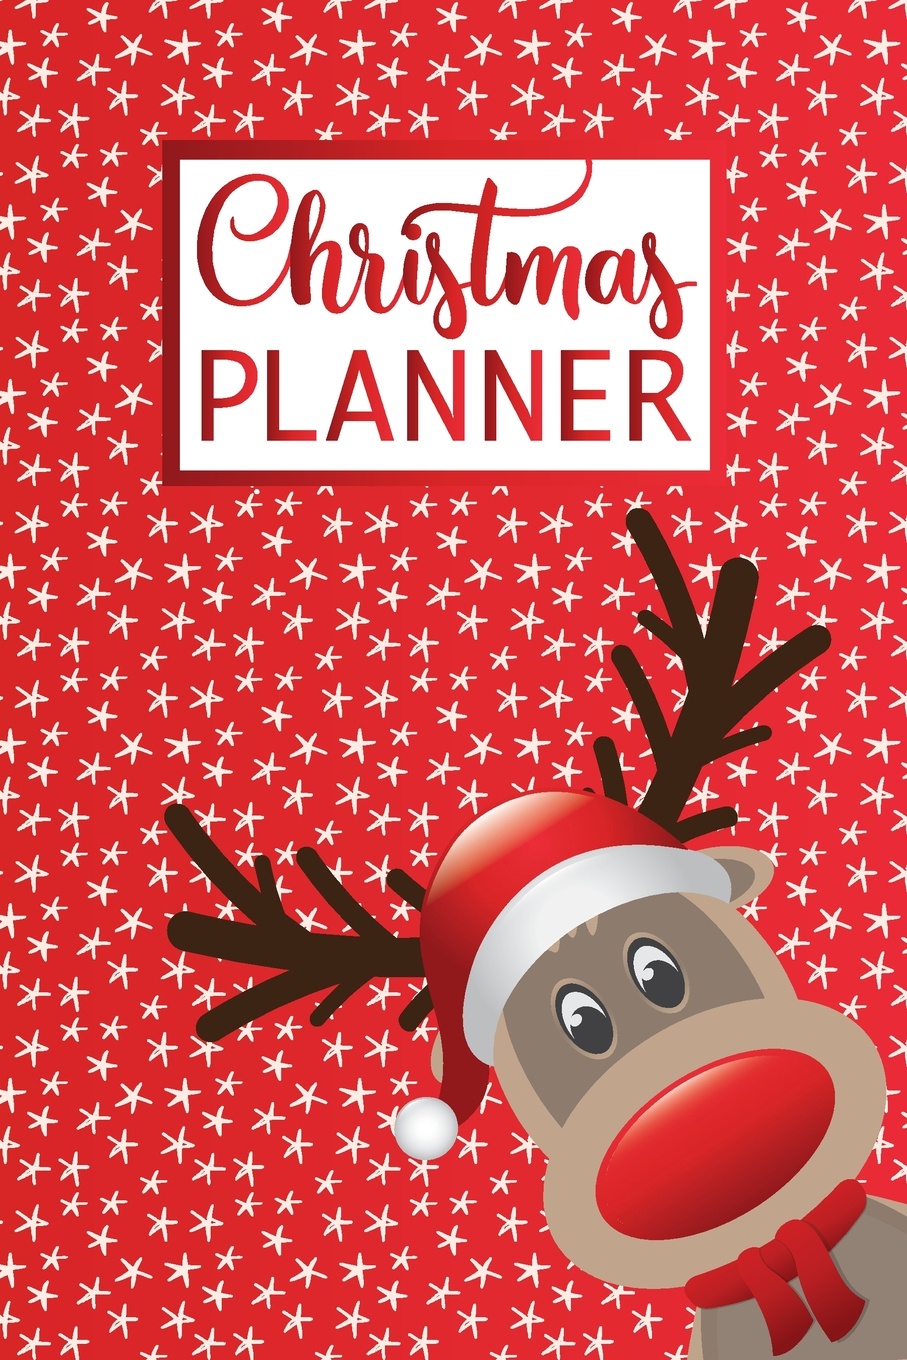 Christmas Planner. The Ultimate Organizer - with Holiday Shopping List, Gift Planner, Online Order and Greeting Card Address Book Tracker